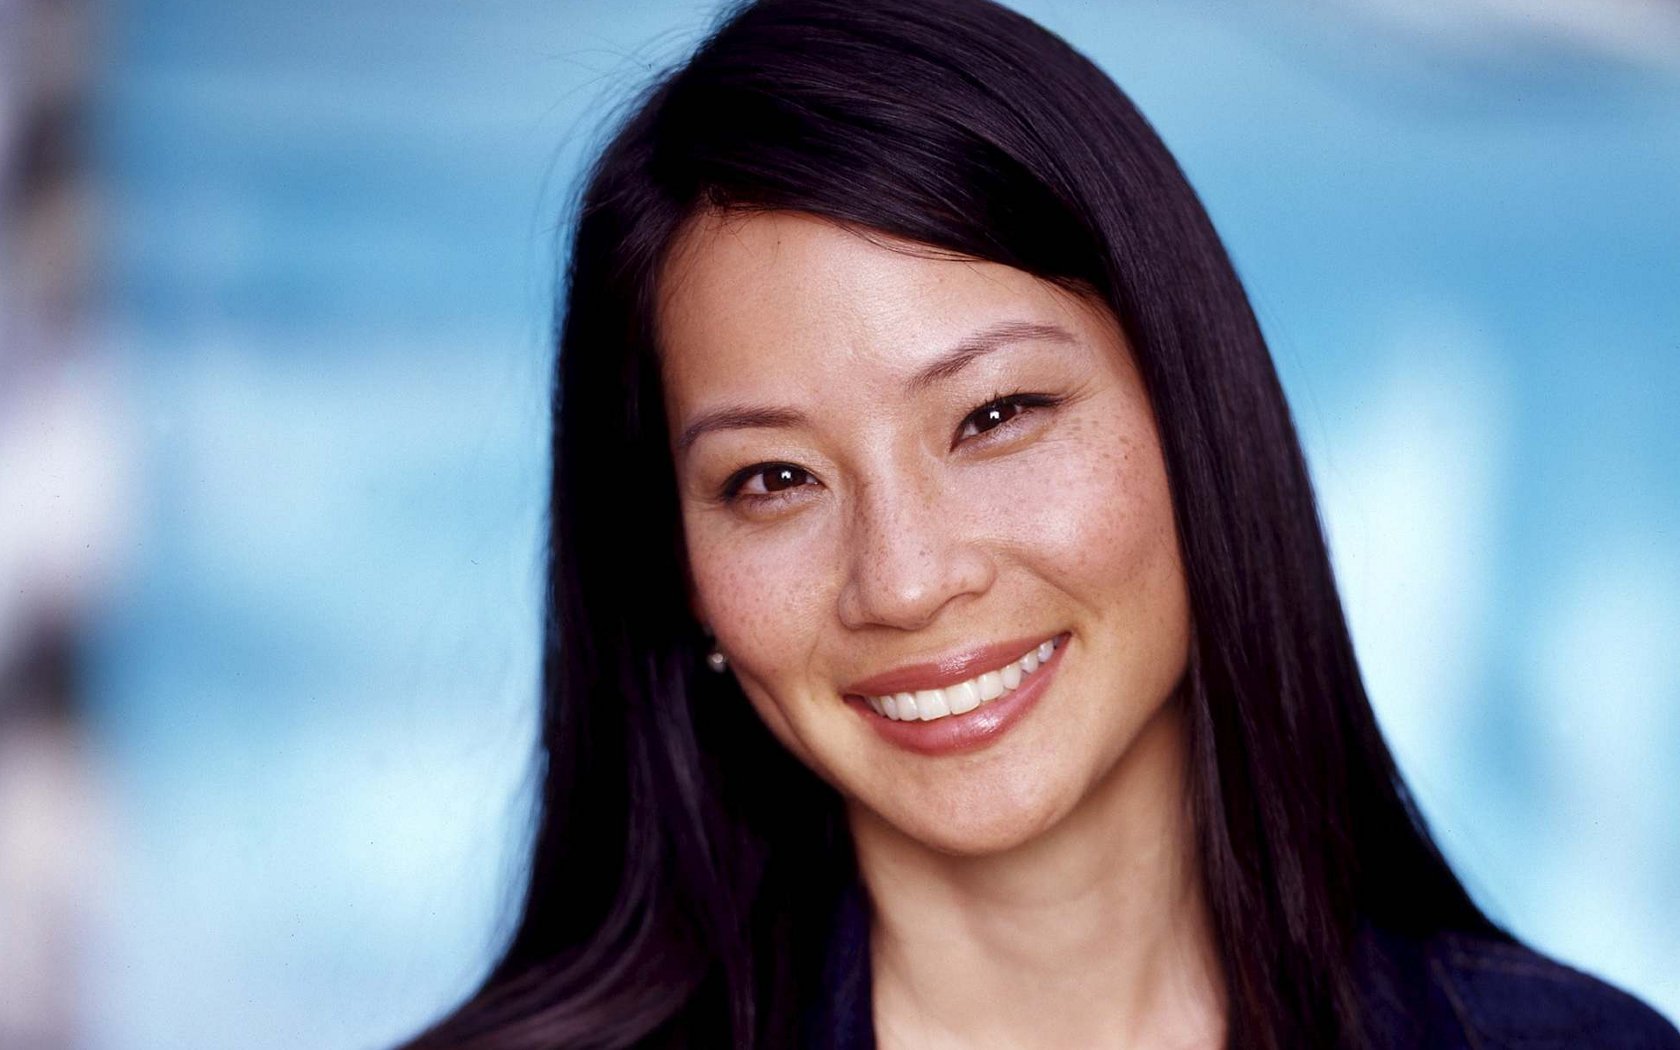 Lucy Liu Smile Pic Wallpaper Hd Celebrities 4k Wallpapers Images